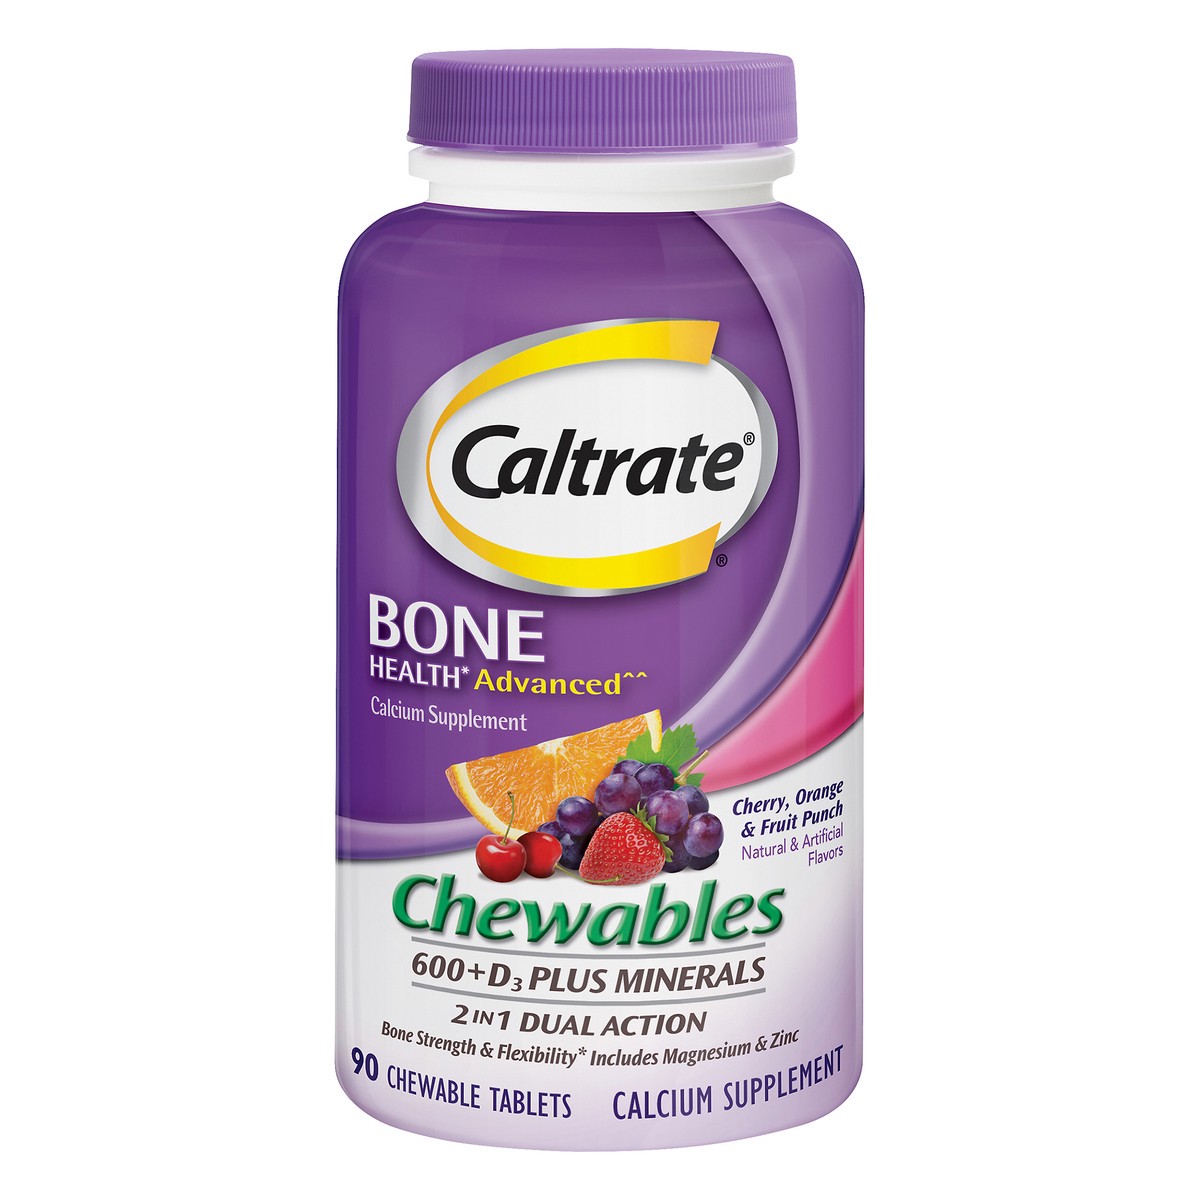 slide 11 of 11, Caltrate 600+D3 Plus Minerals (Cherry, Orange, and Fruit Punch, 90 Count) Calcium & Vitamin D3 Chewable Supplement, 600mg, 90 ct